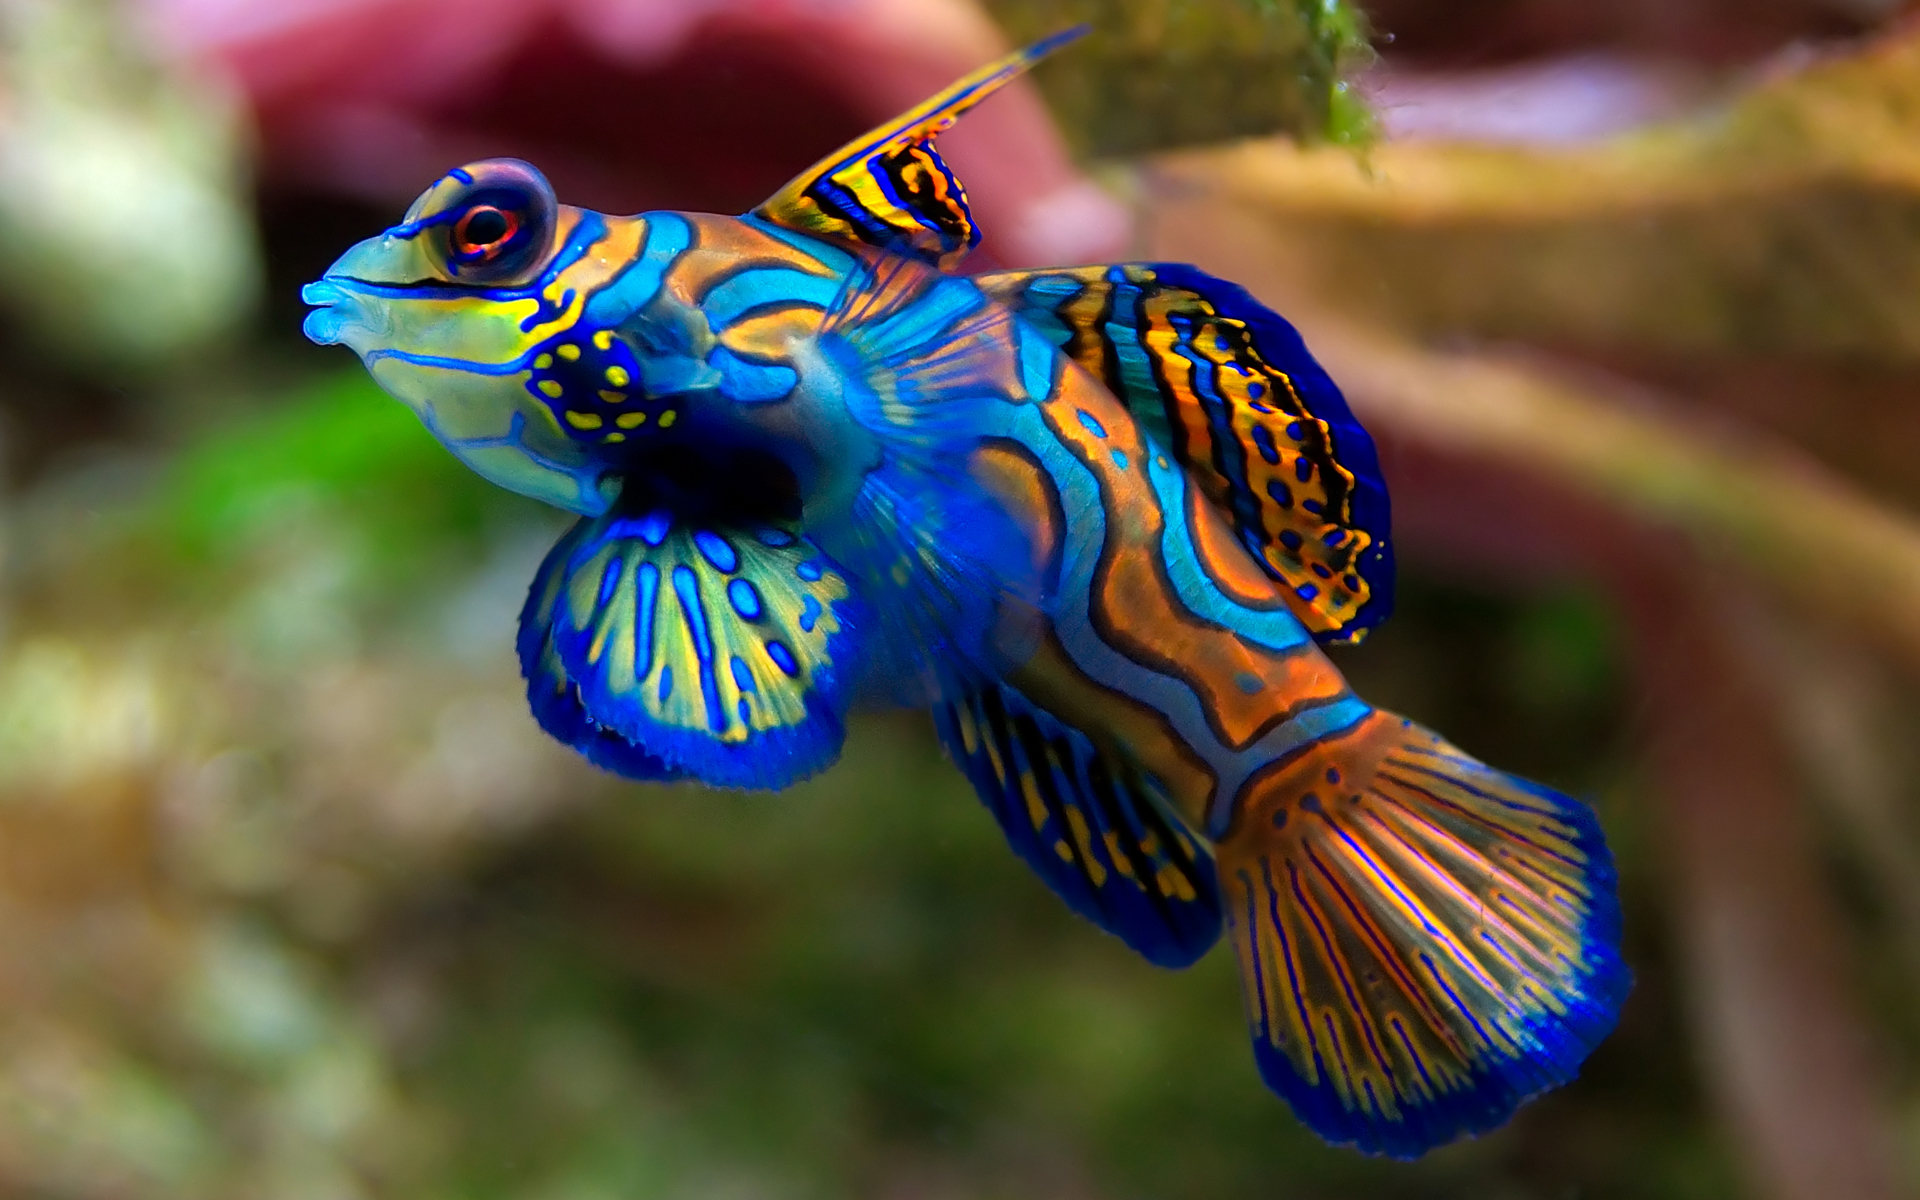 Cool Fish Backgrounds